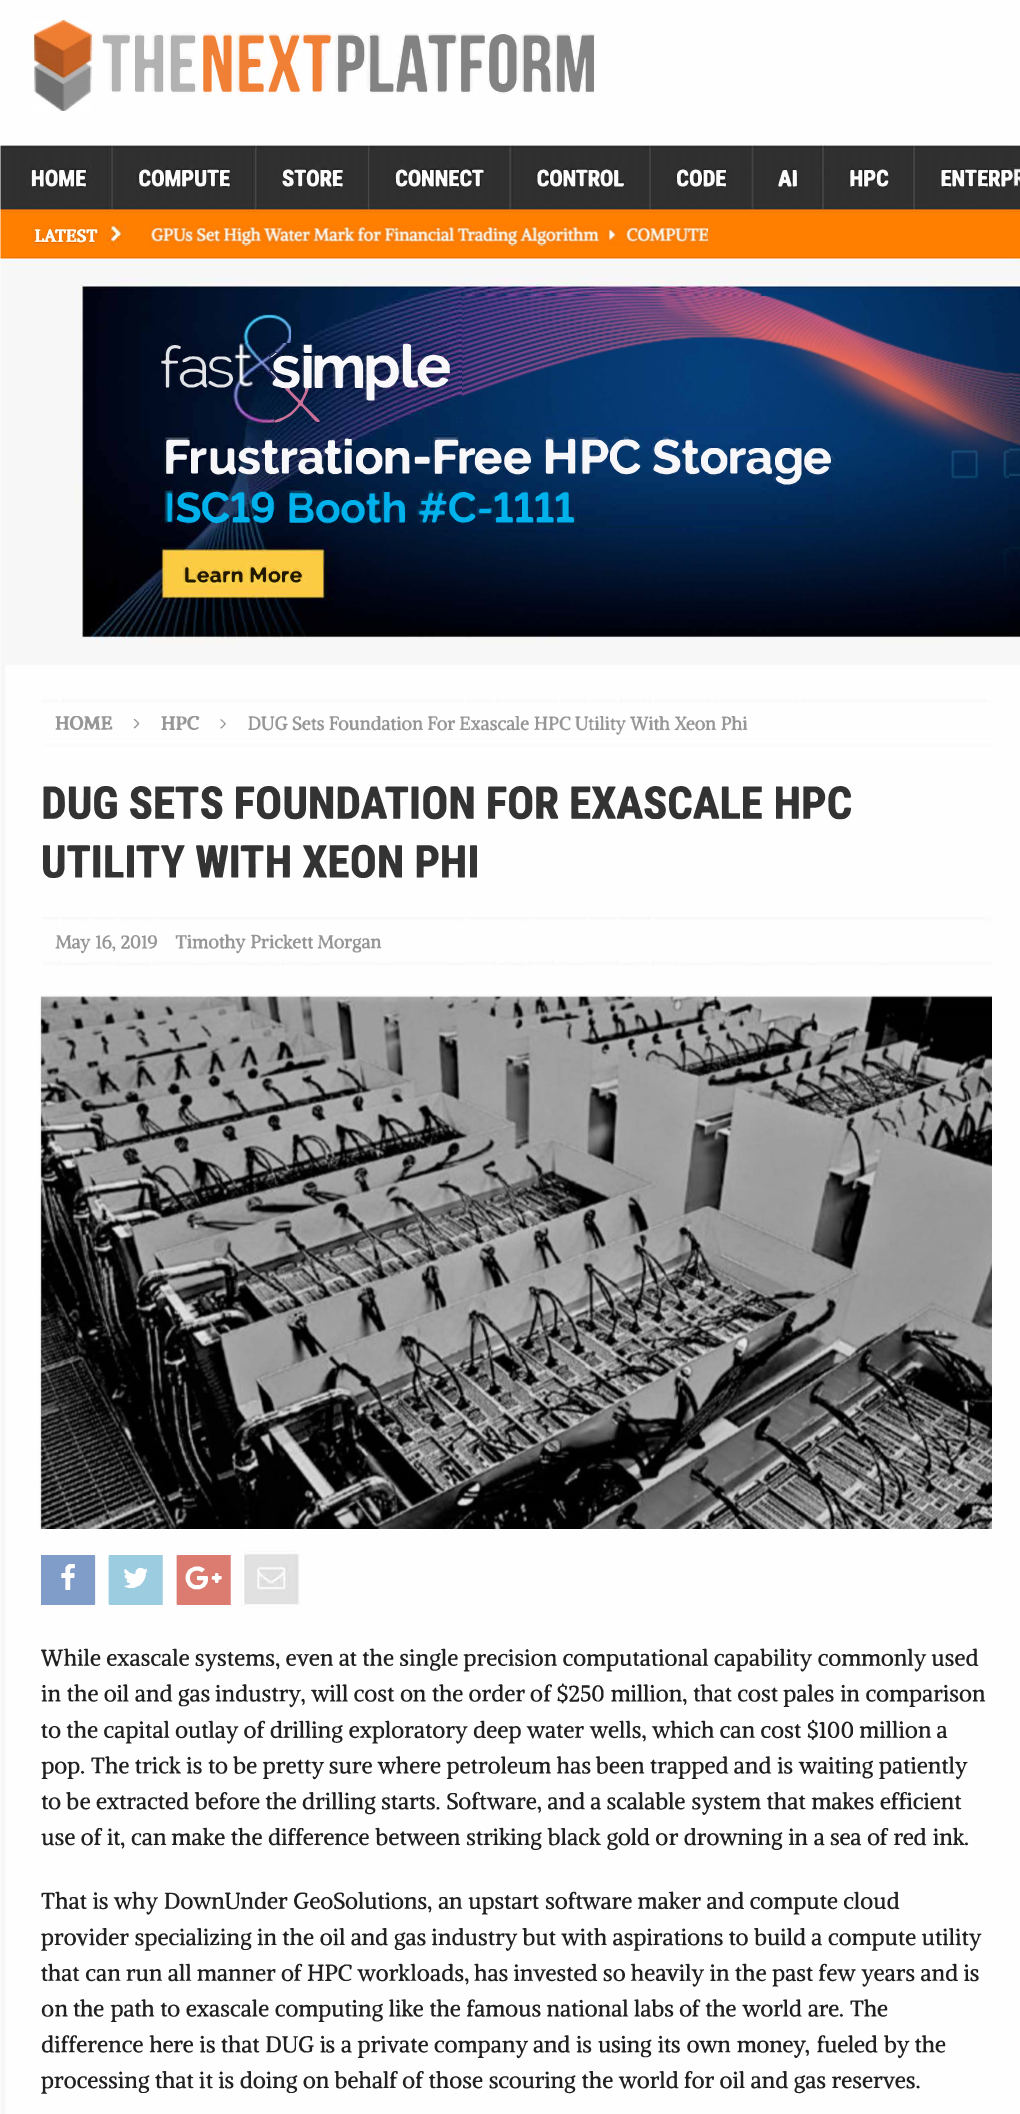 DUG Sets Foundation for Exascale HPC Utility with Xeon Phi